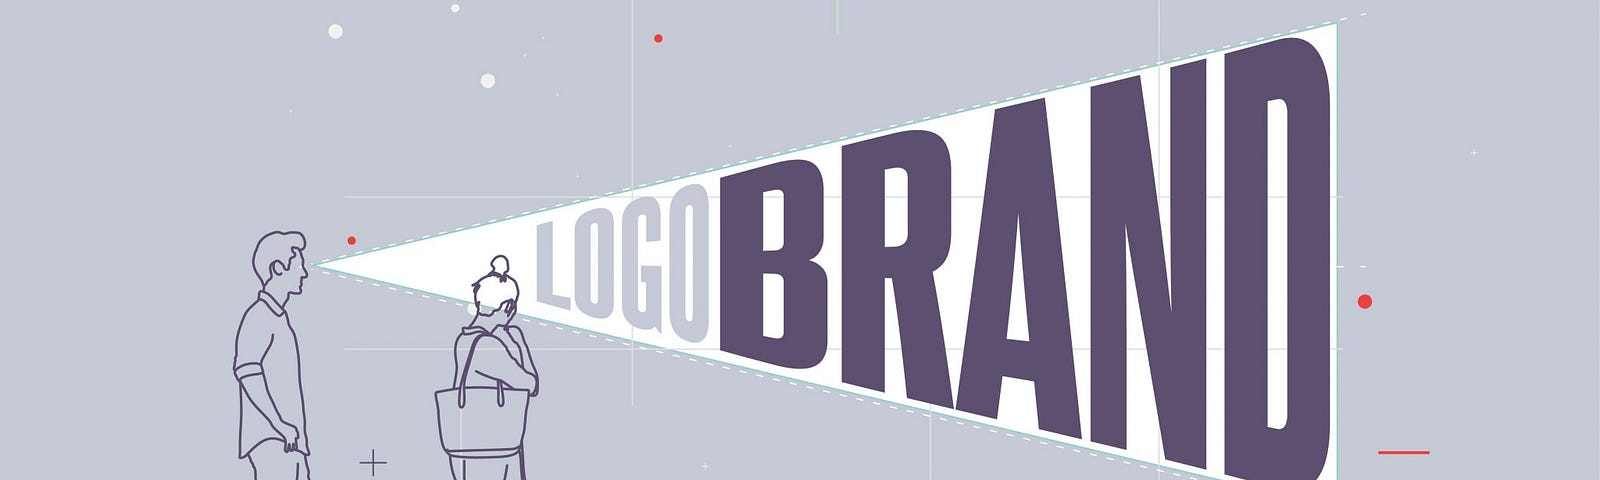 graphic showing two people illustrated along with the text “logo, brand”